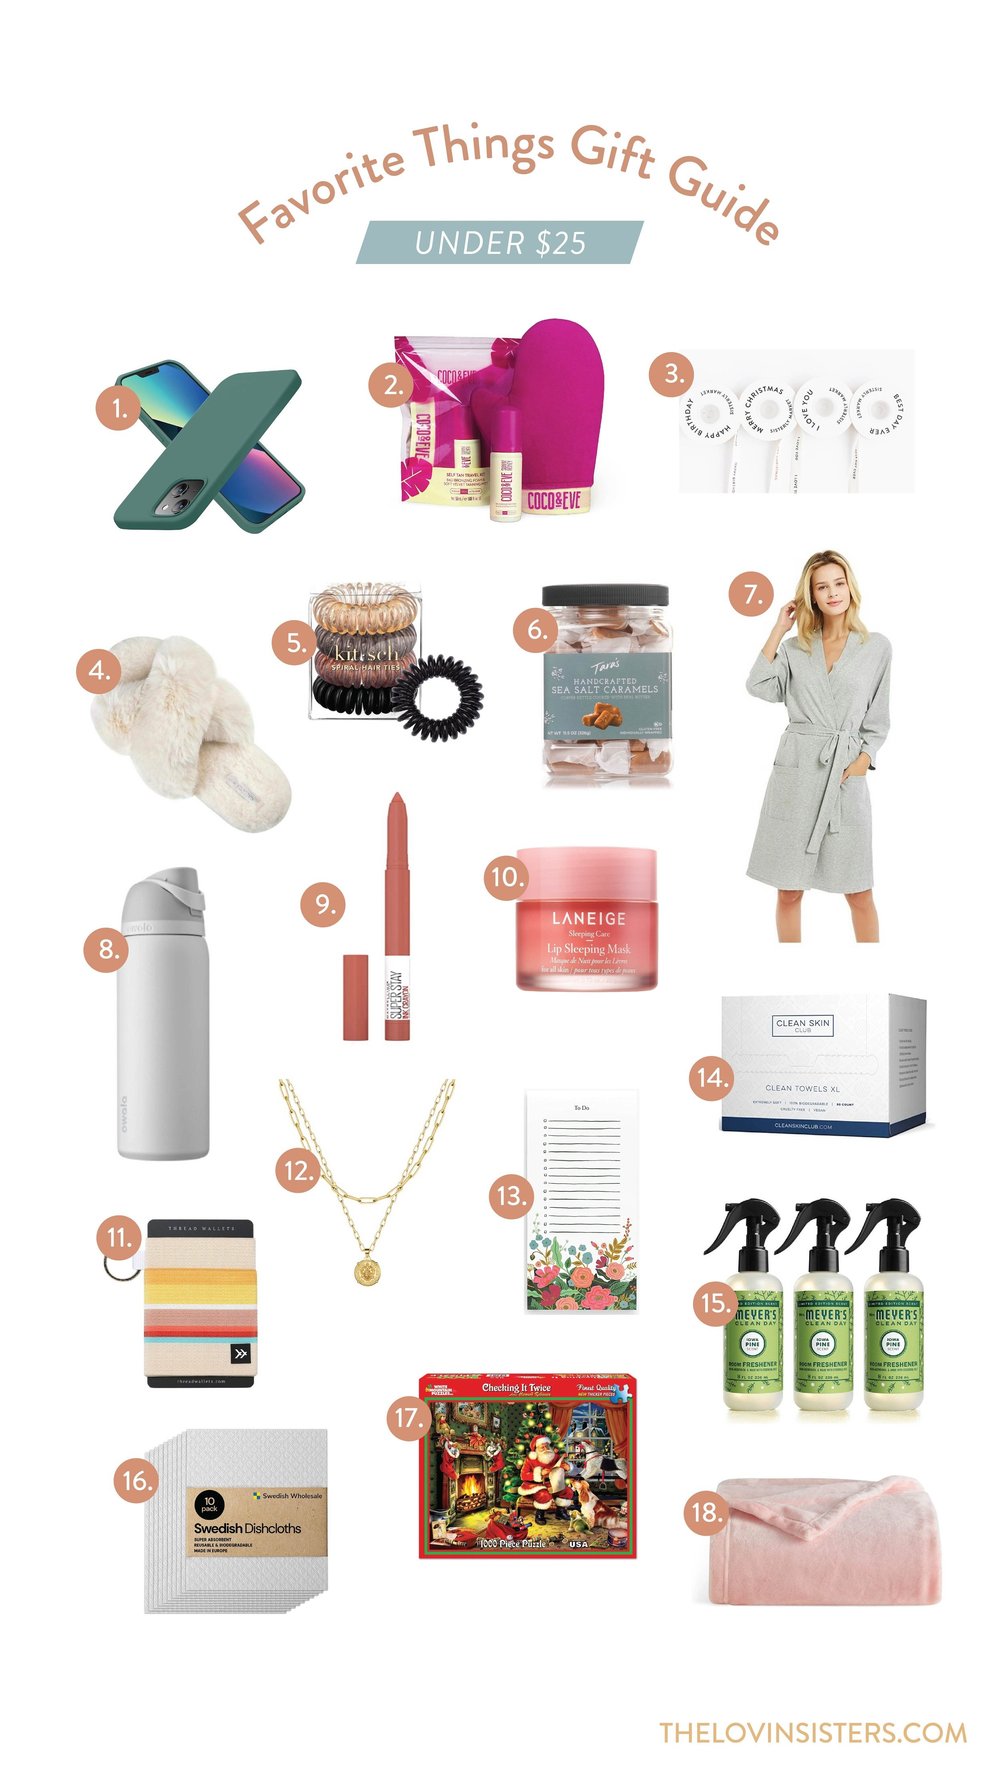 Our Favorite Things Gift Guide: For Him and Her - Life On Virginia